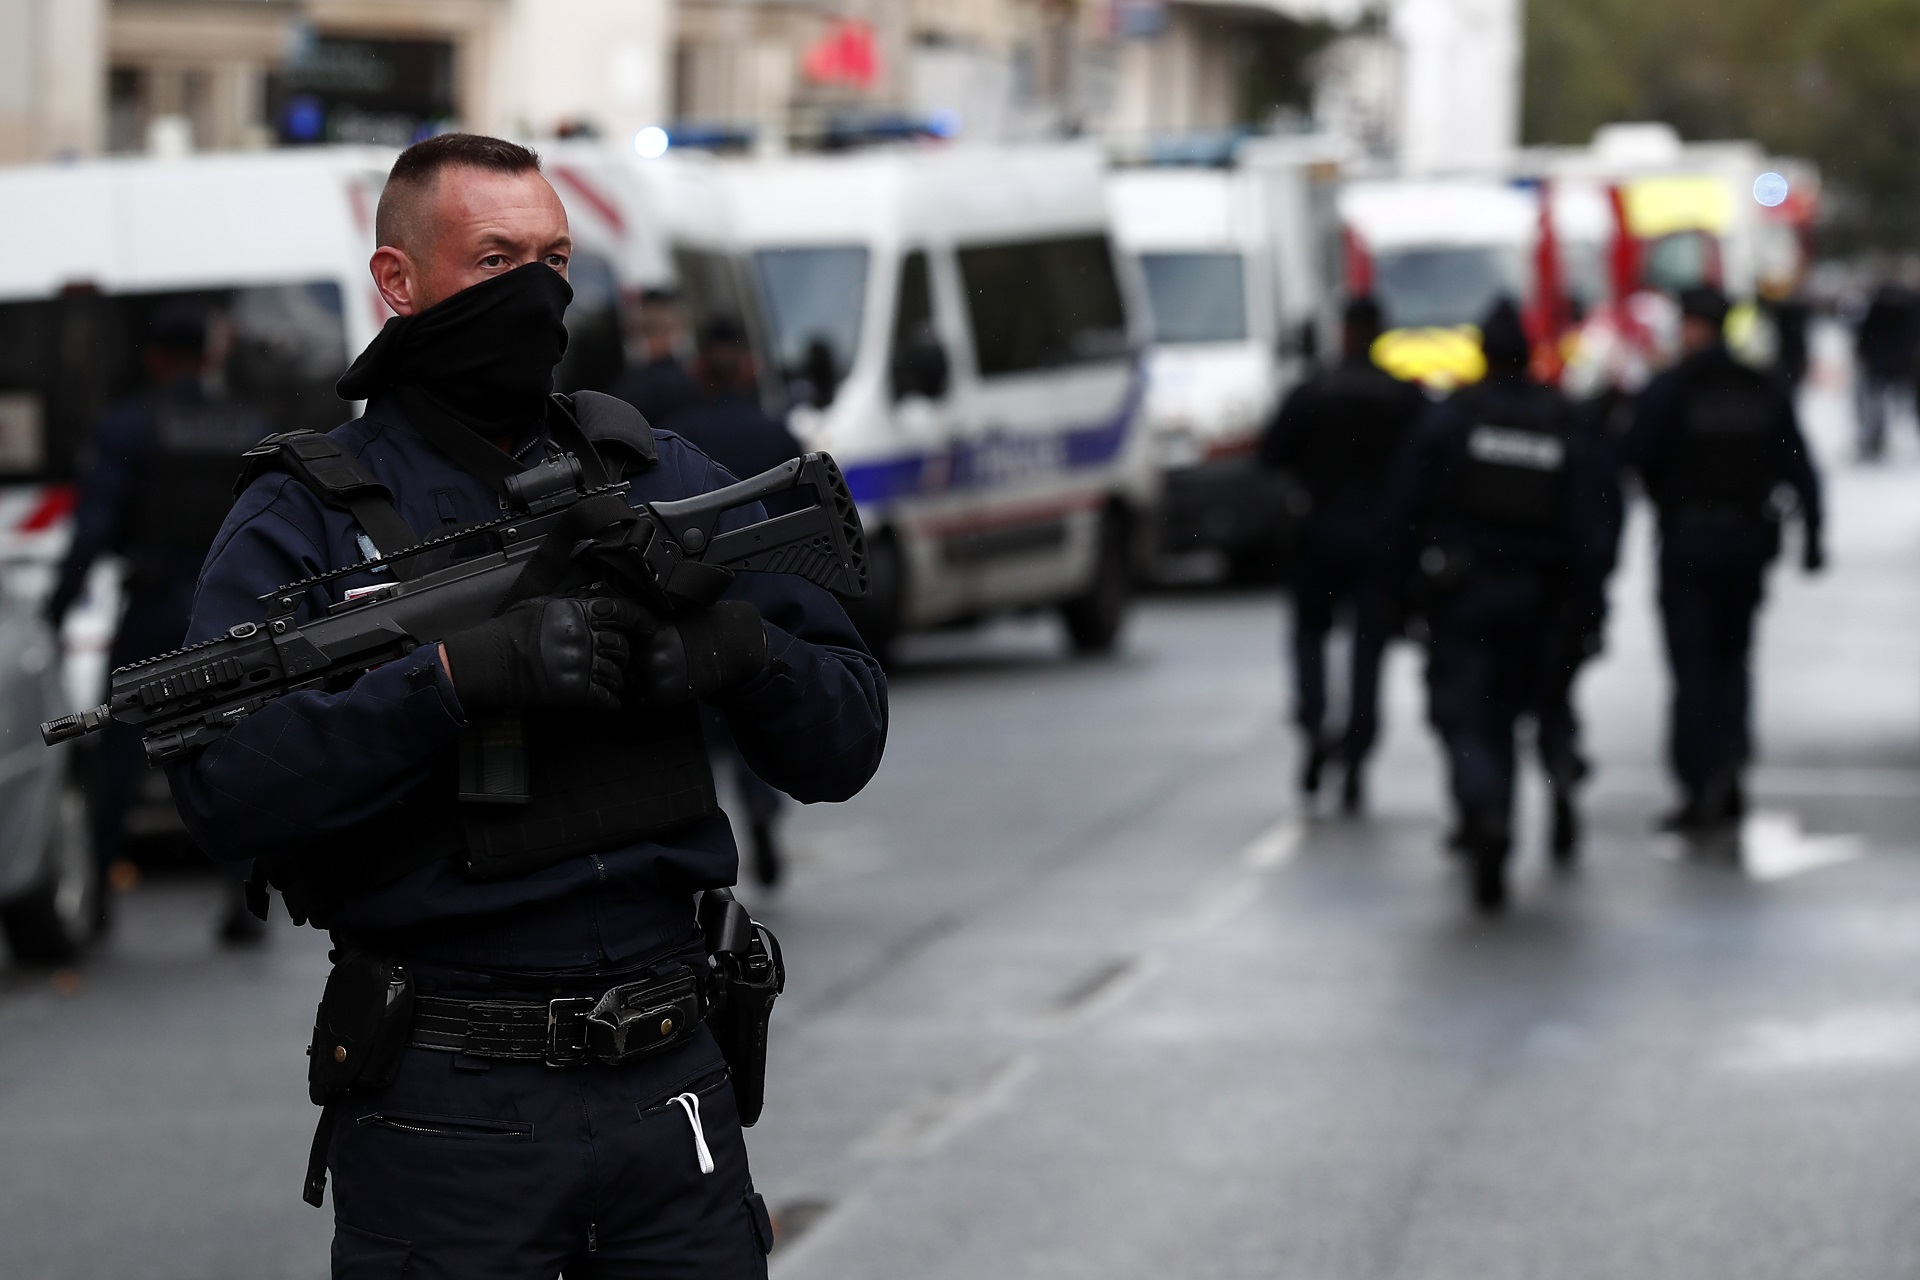 epa08696042 French police and rescue team stand at a security perimeter near the former Charlie Hebdo offices, in Paris, France, 25 September 2020, after four people have been wounded in knife attack. According to recent reports, two assailants are on the run.  EPA/IAN LANGSDON